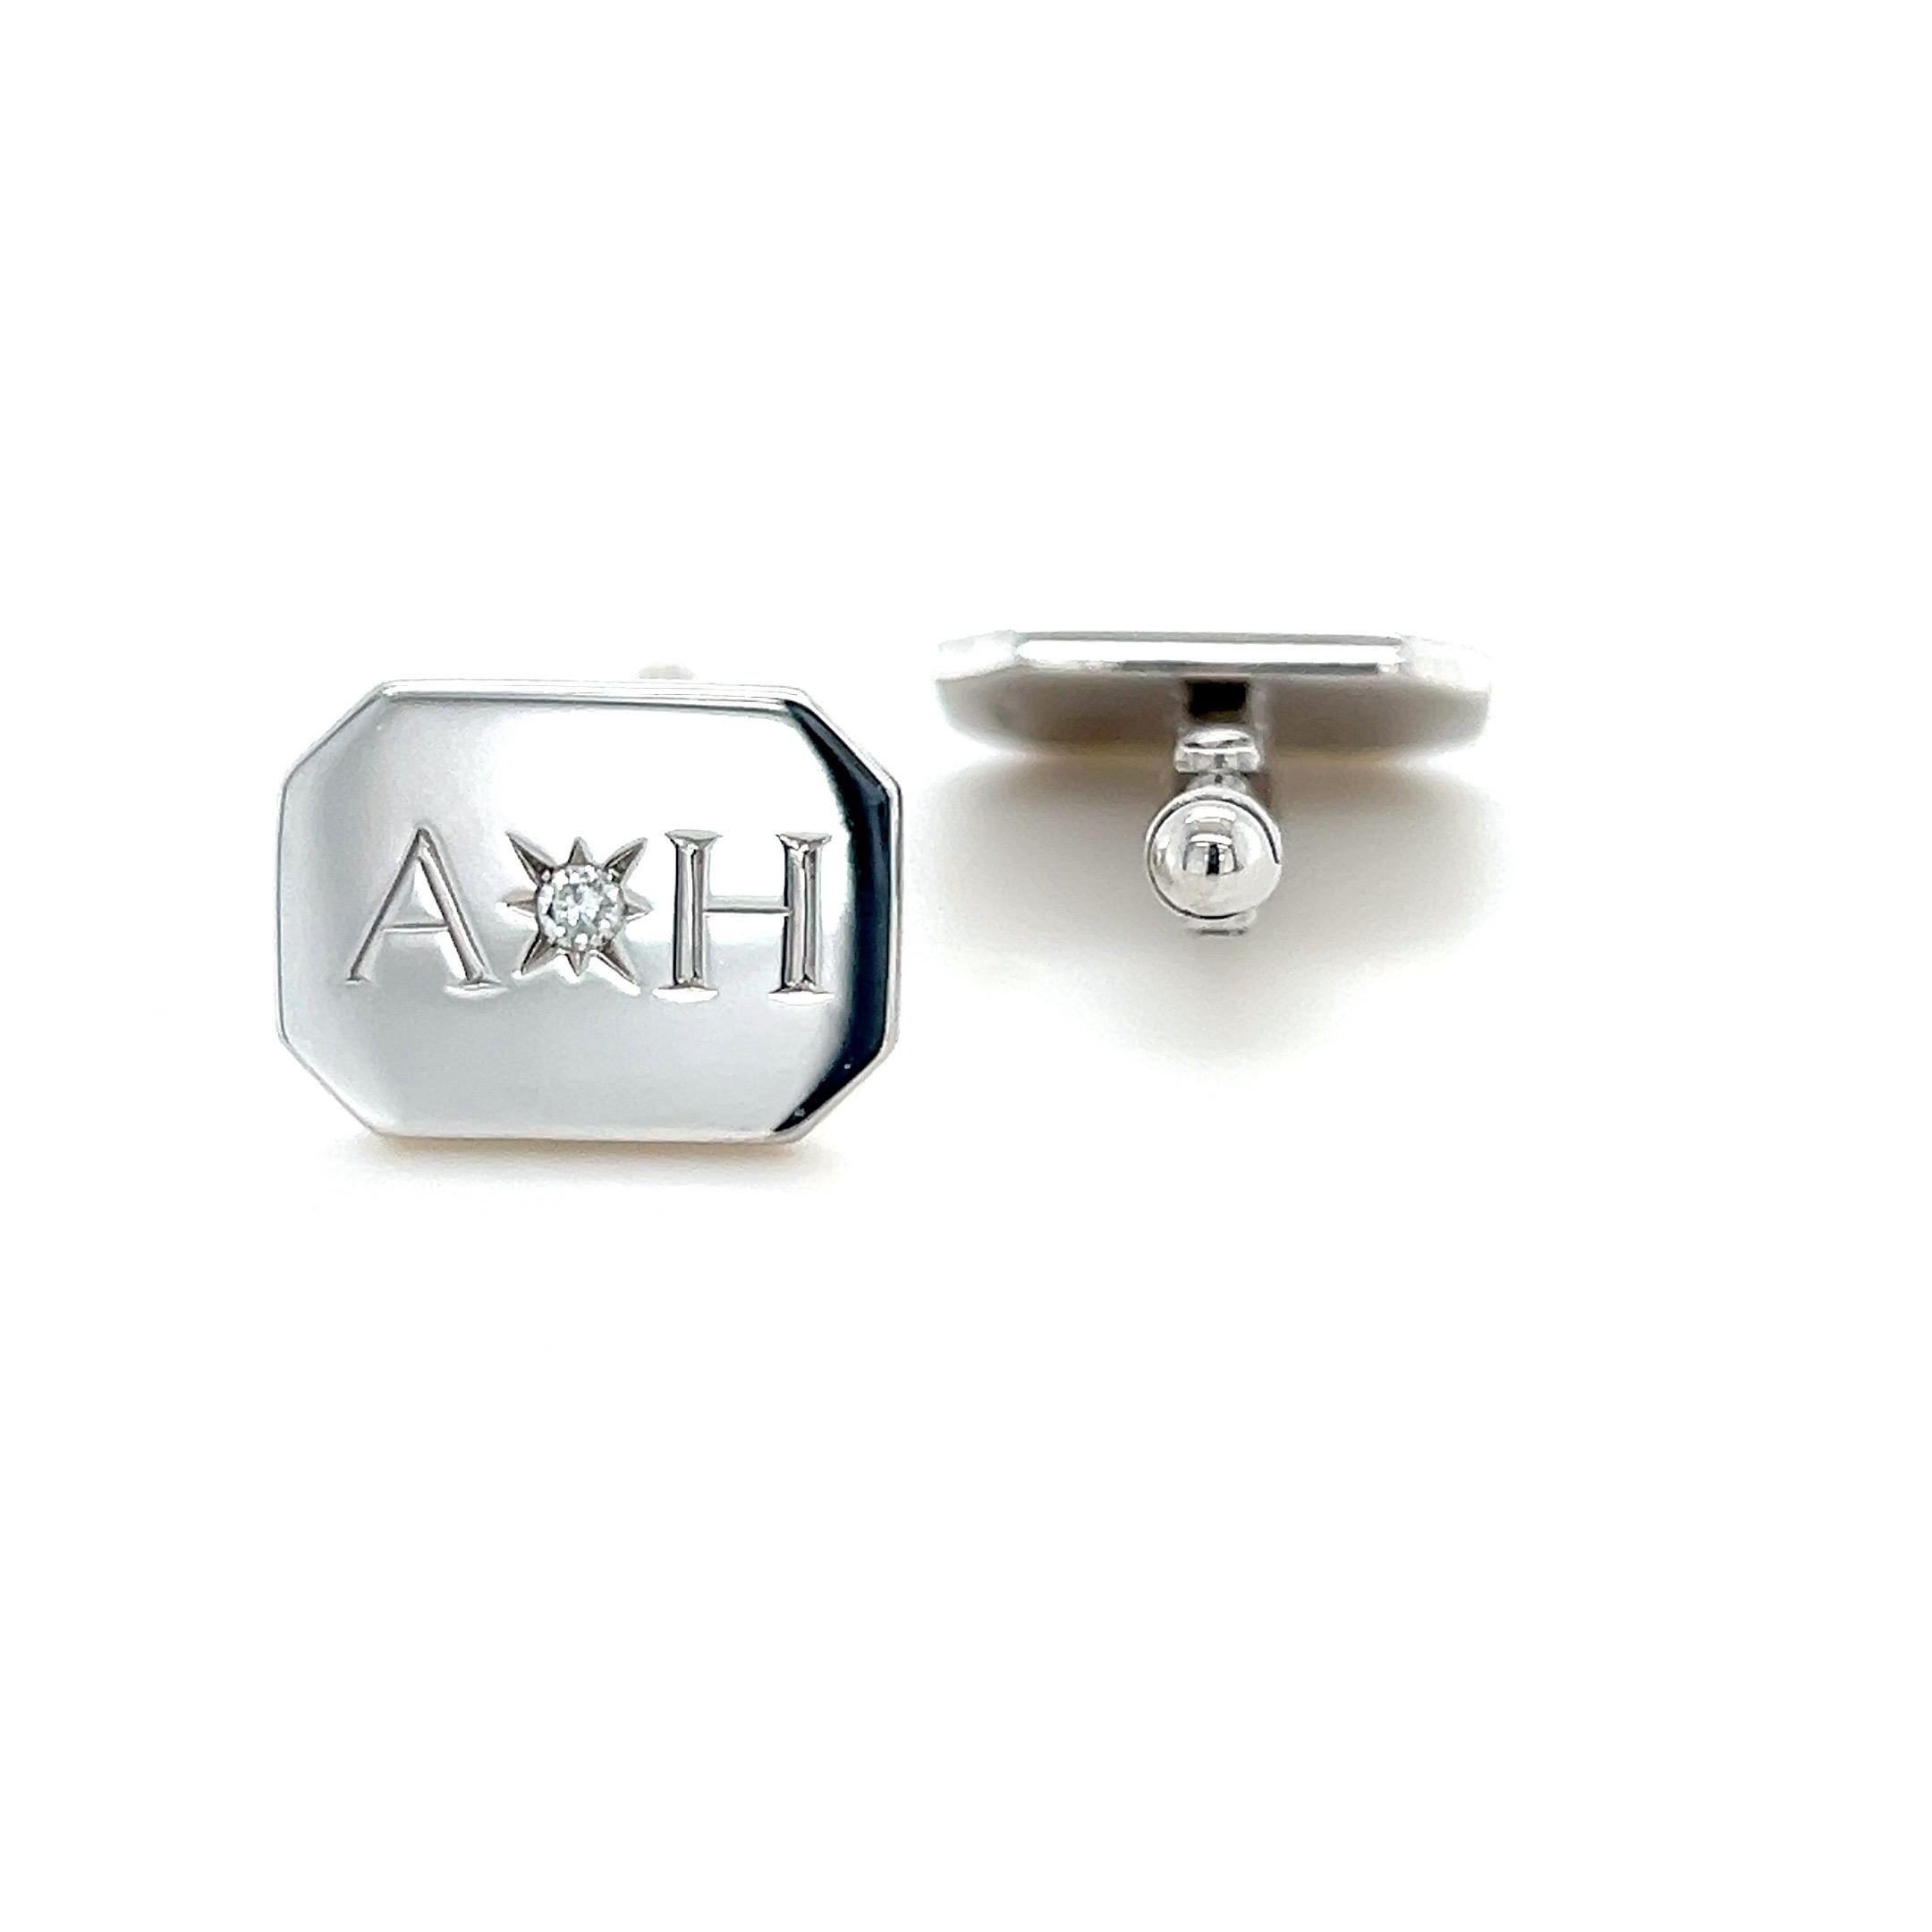 We believe in creating your own unique look by creating your own style.  These cufflinks are completely bespoke and exquisite for the discerning gentleman. Expertly hand crafted in solid 18 karat white gold and hand engraved to your specification.